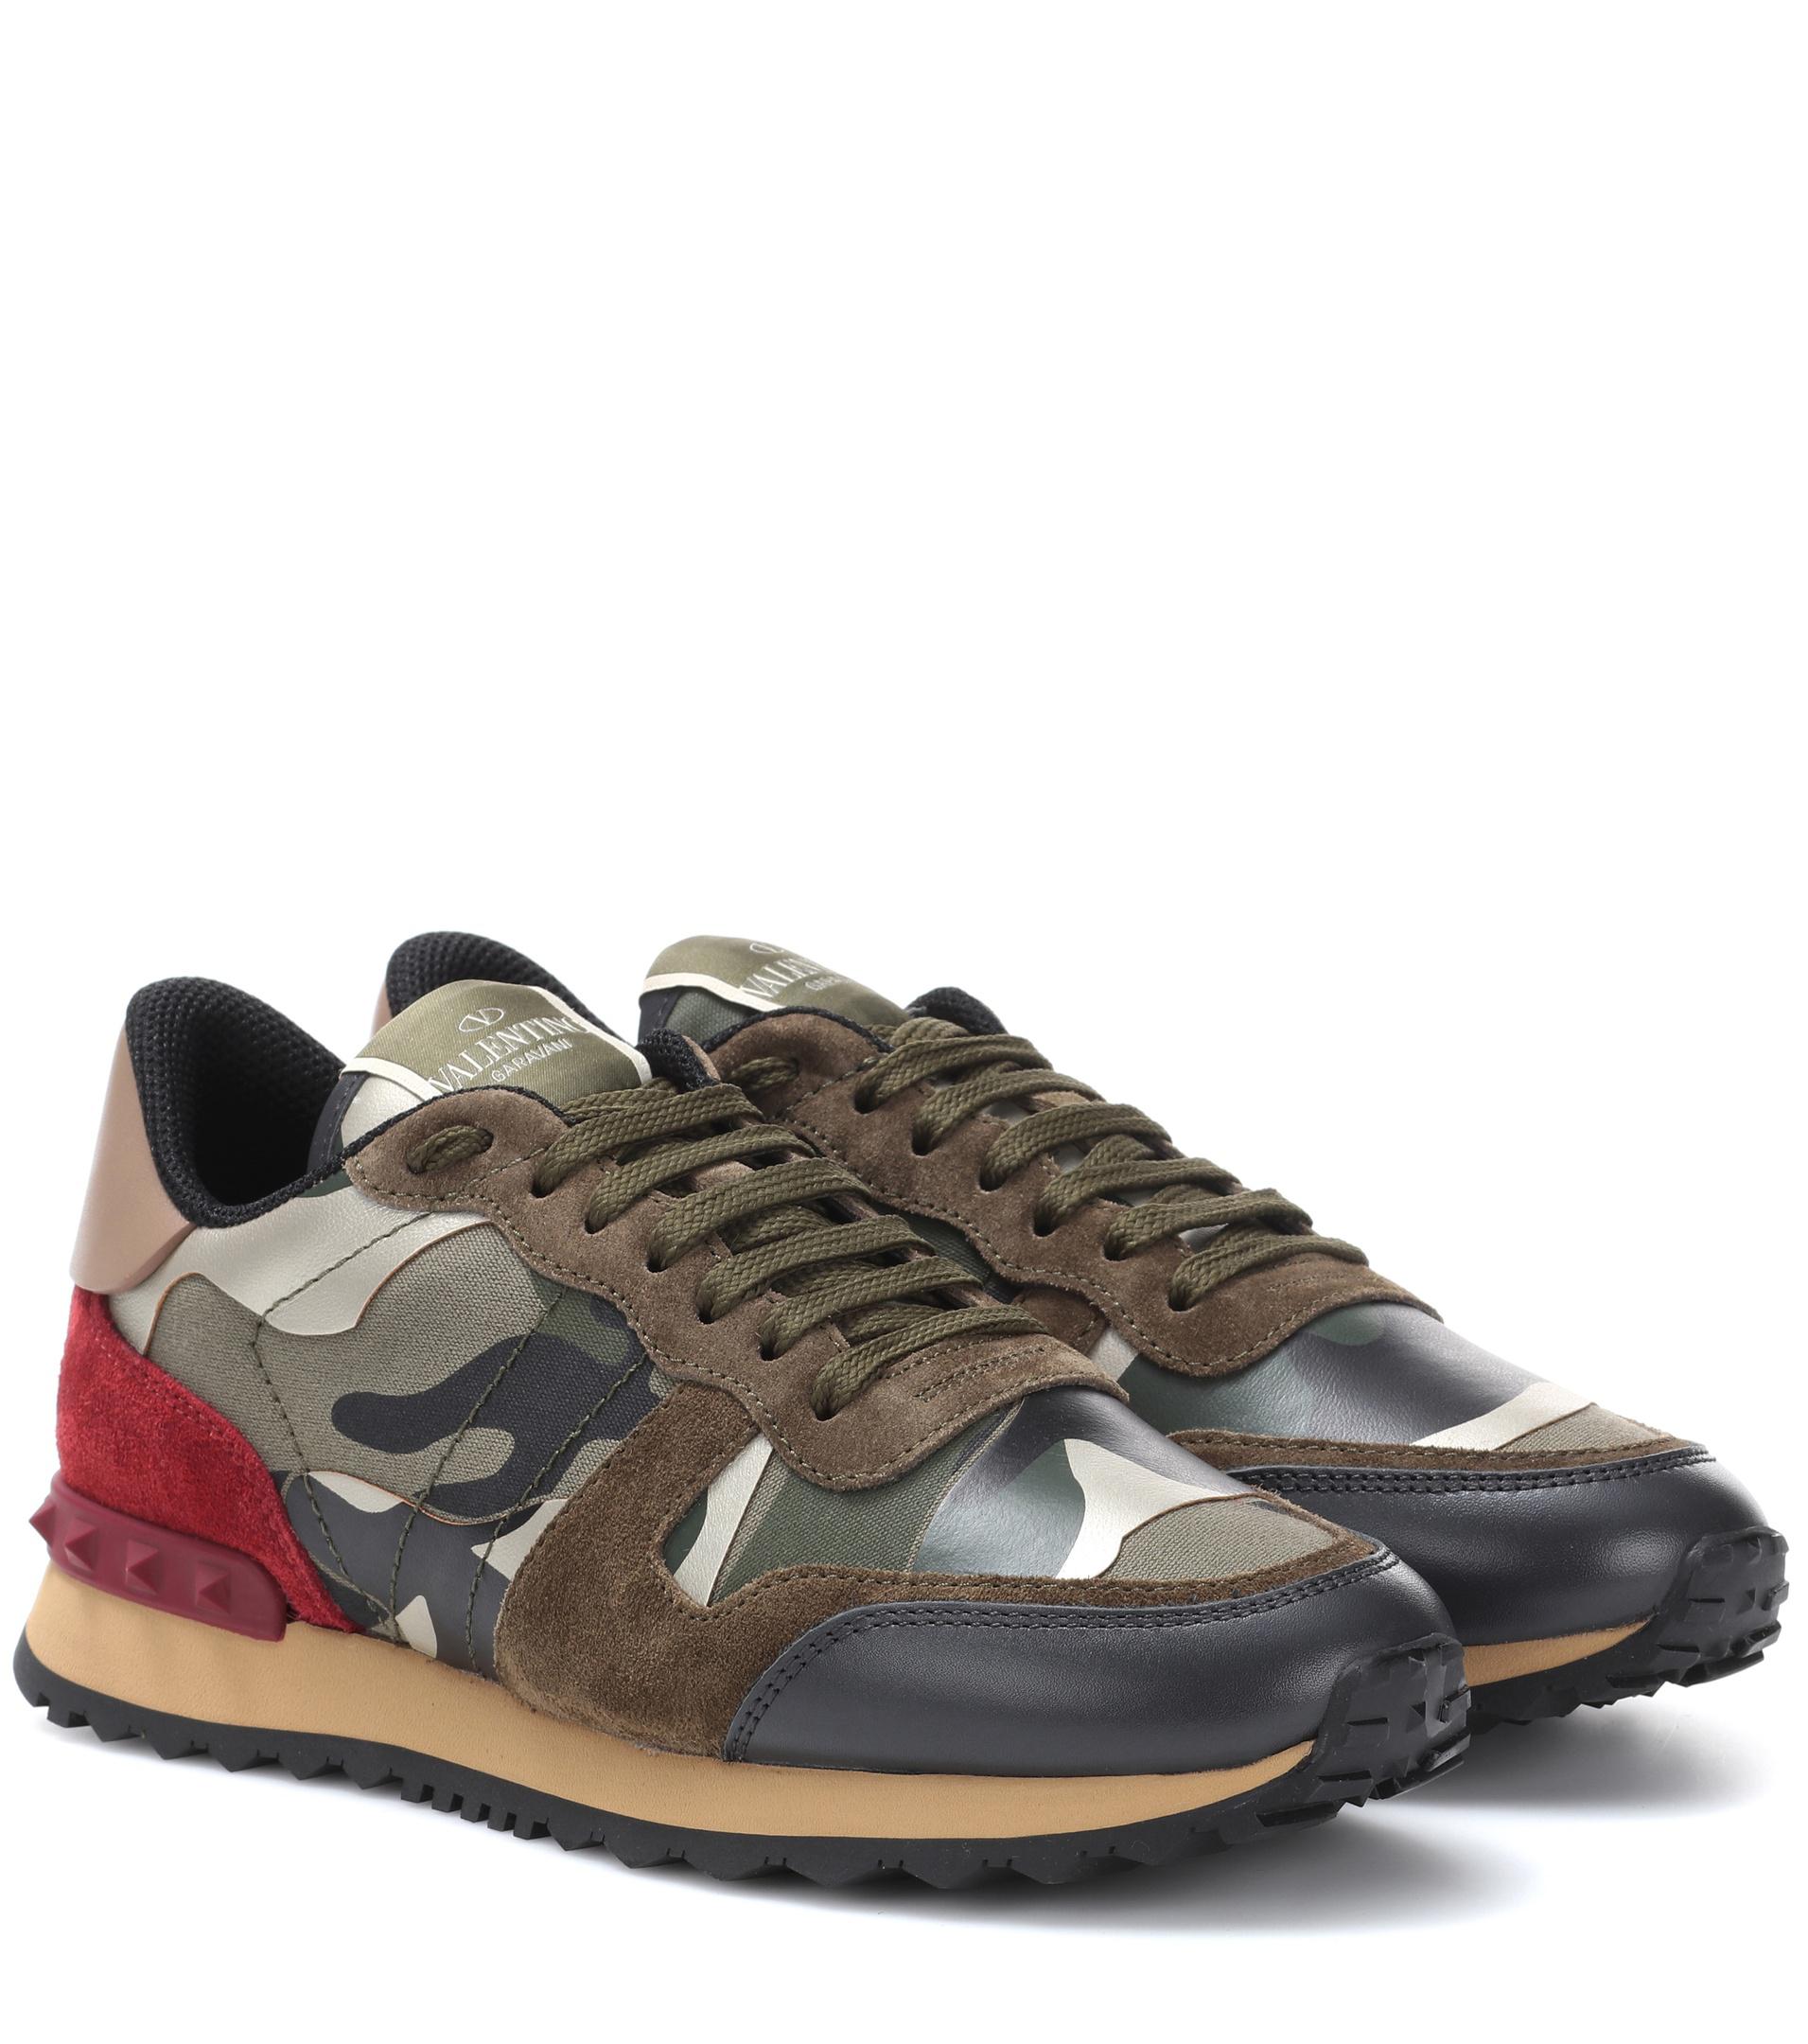 Lyst - Valentino Rockrunner Camouflage Sneakers in Green